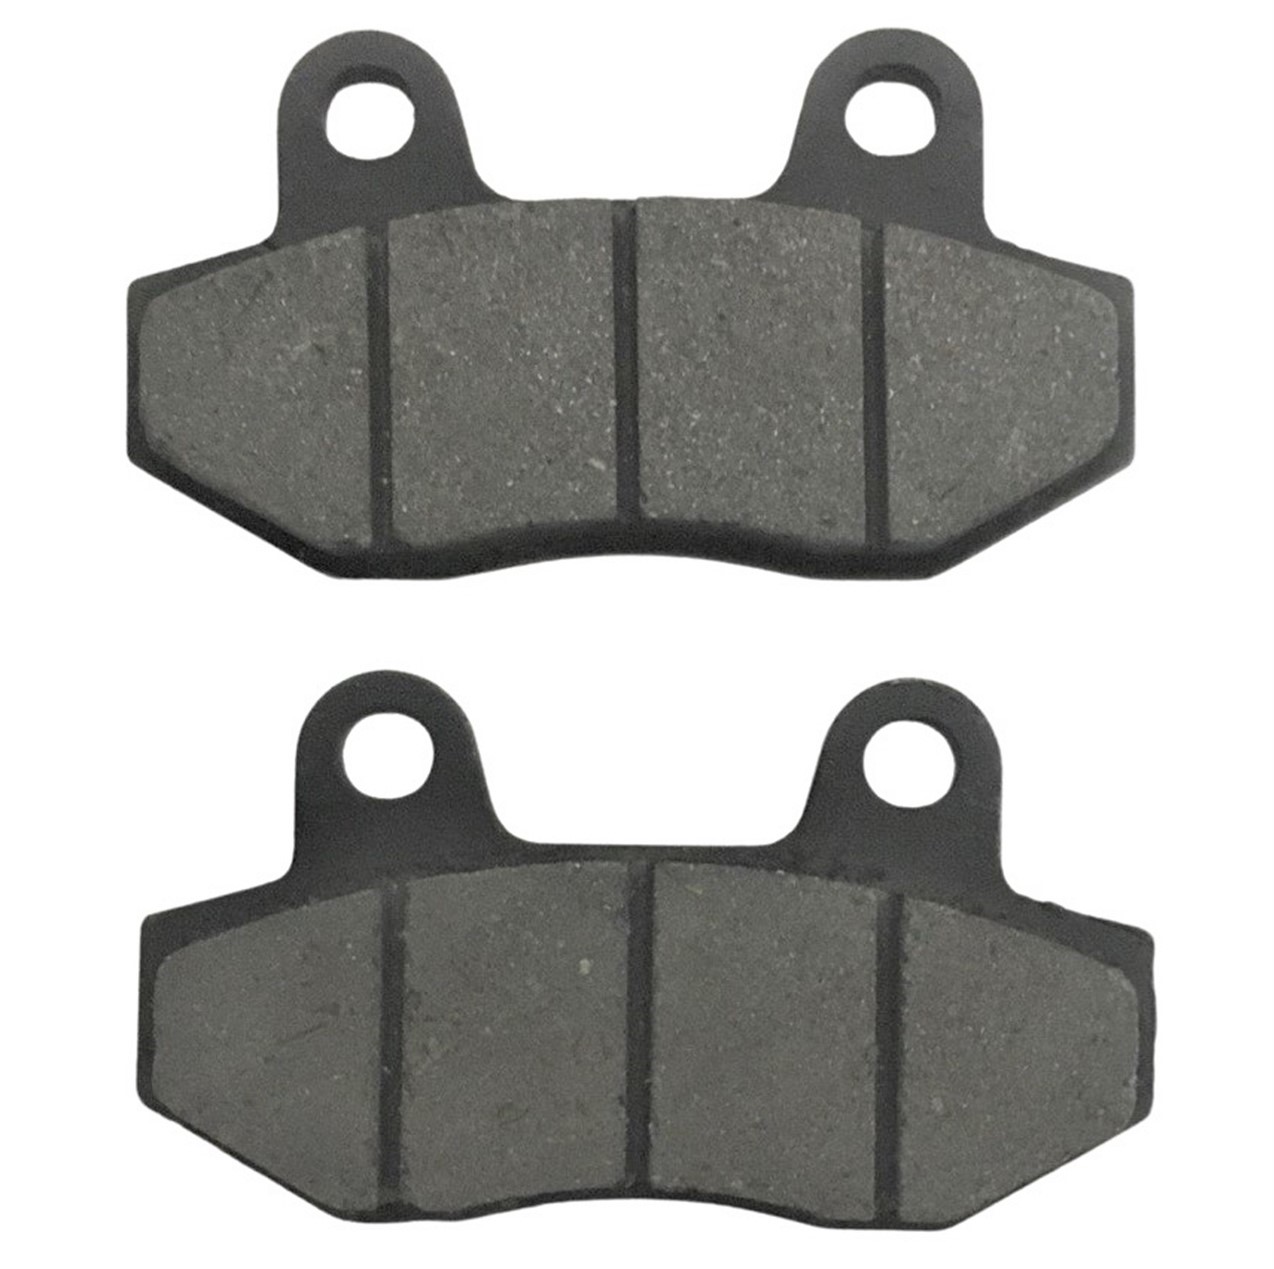 Disc Brake Pads 28x78x9 c/c 40mm Fit E-Ton Sport 50-150, Tomos Nitro 50-150 Scooters, Baja WD90, WD250 ATVs + others